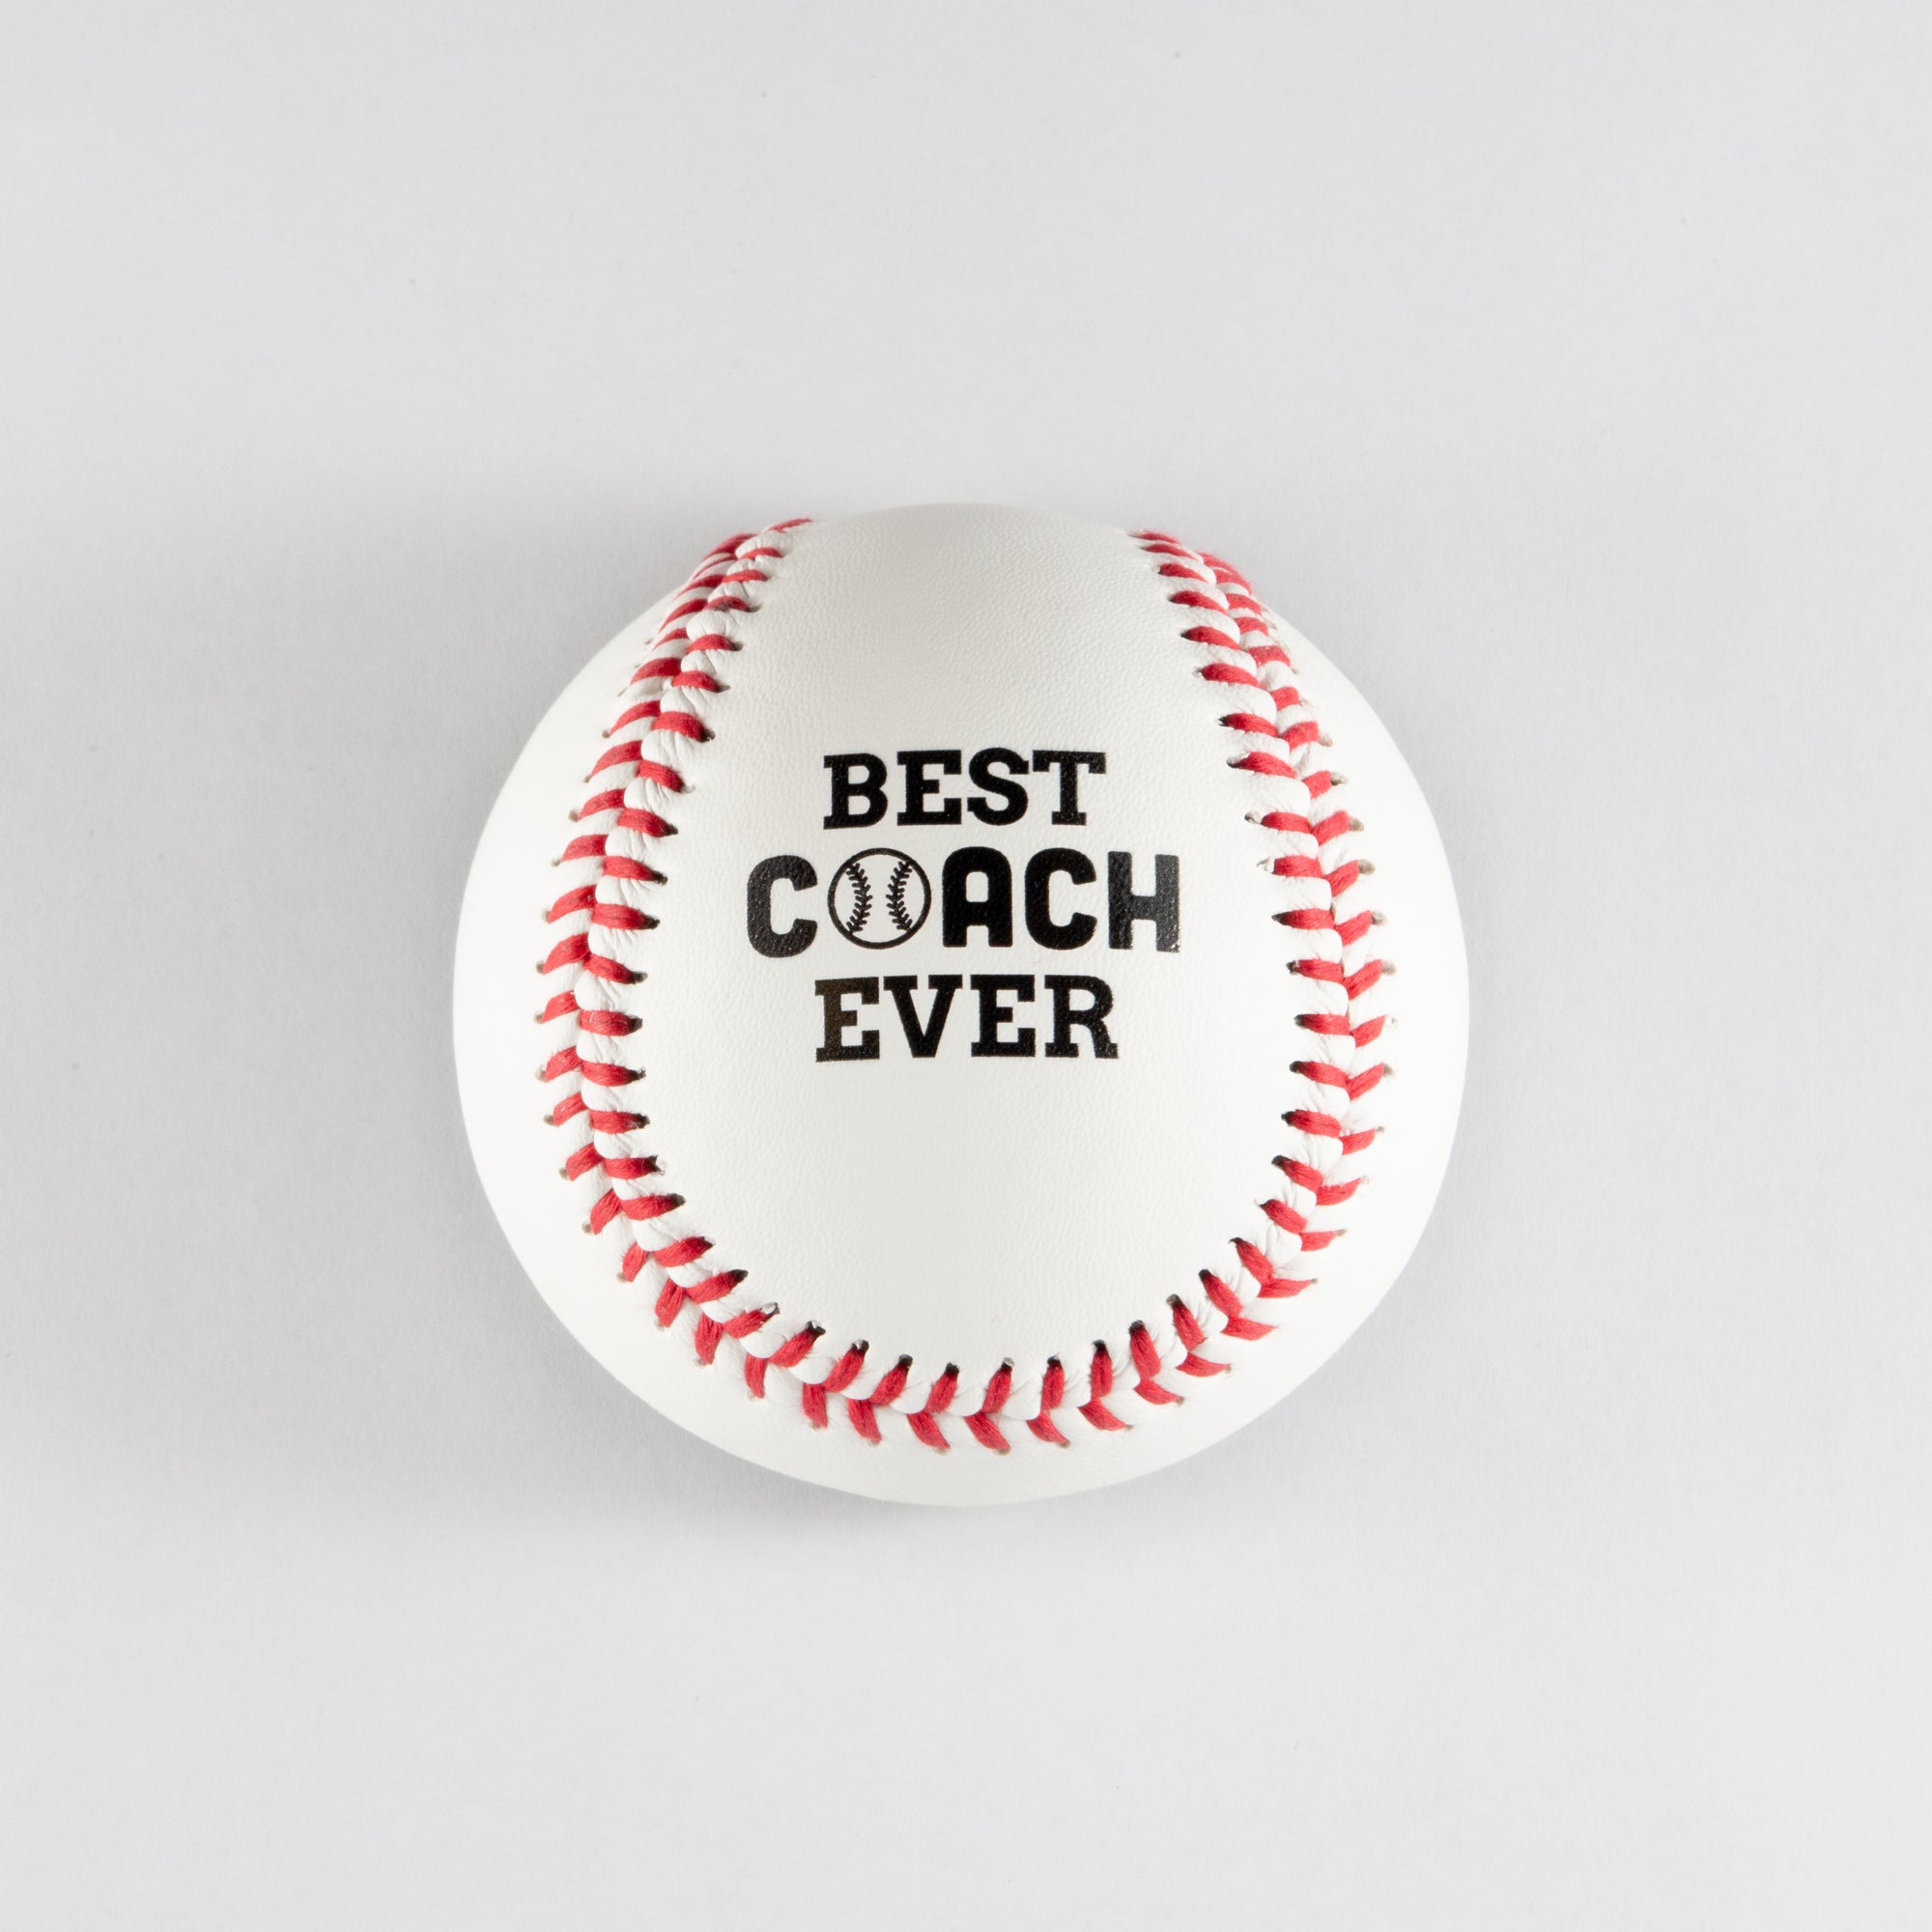 Personal Message to Coach, Baseball Bottle Opener